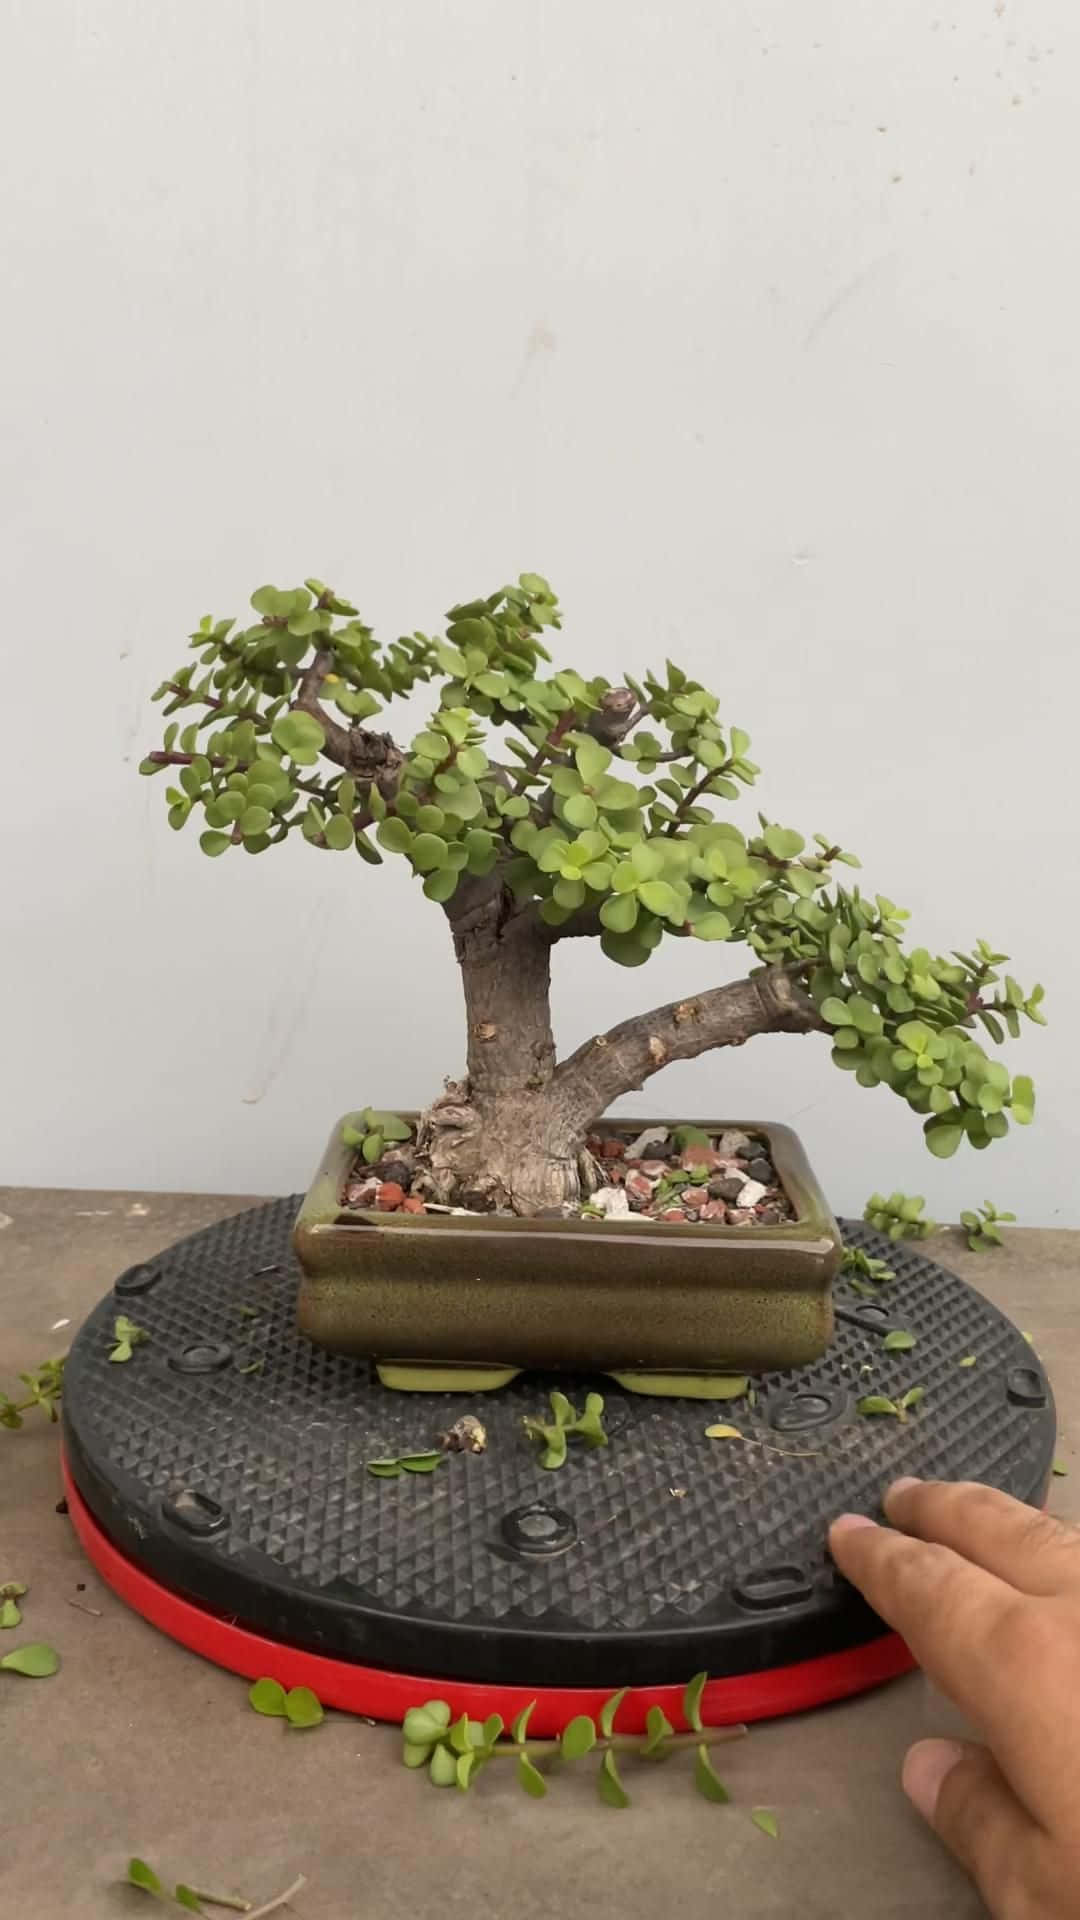 An enchanting bonsai tree in its pots - the perfect combination of beauty and harmony